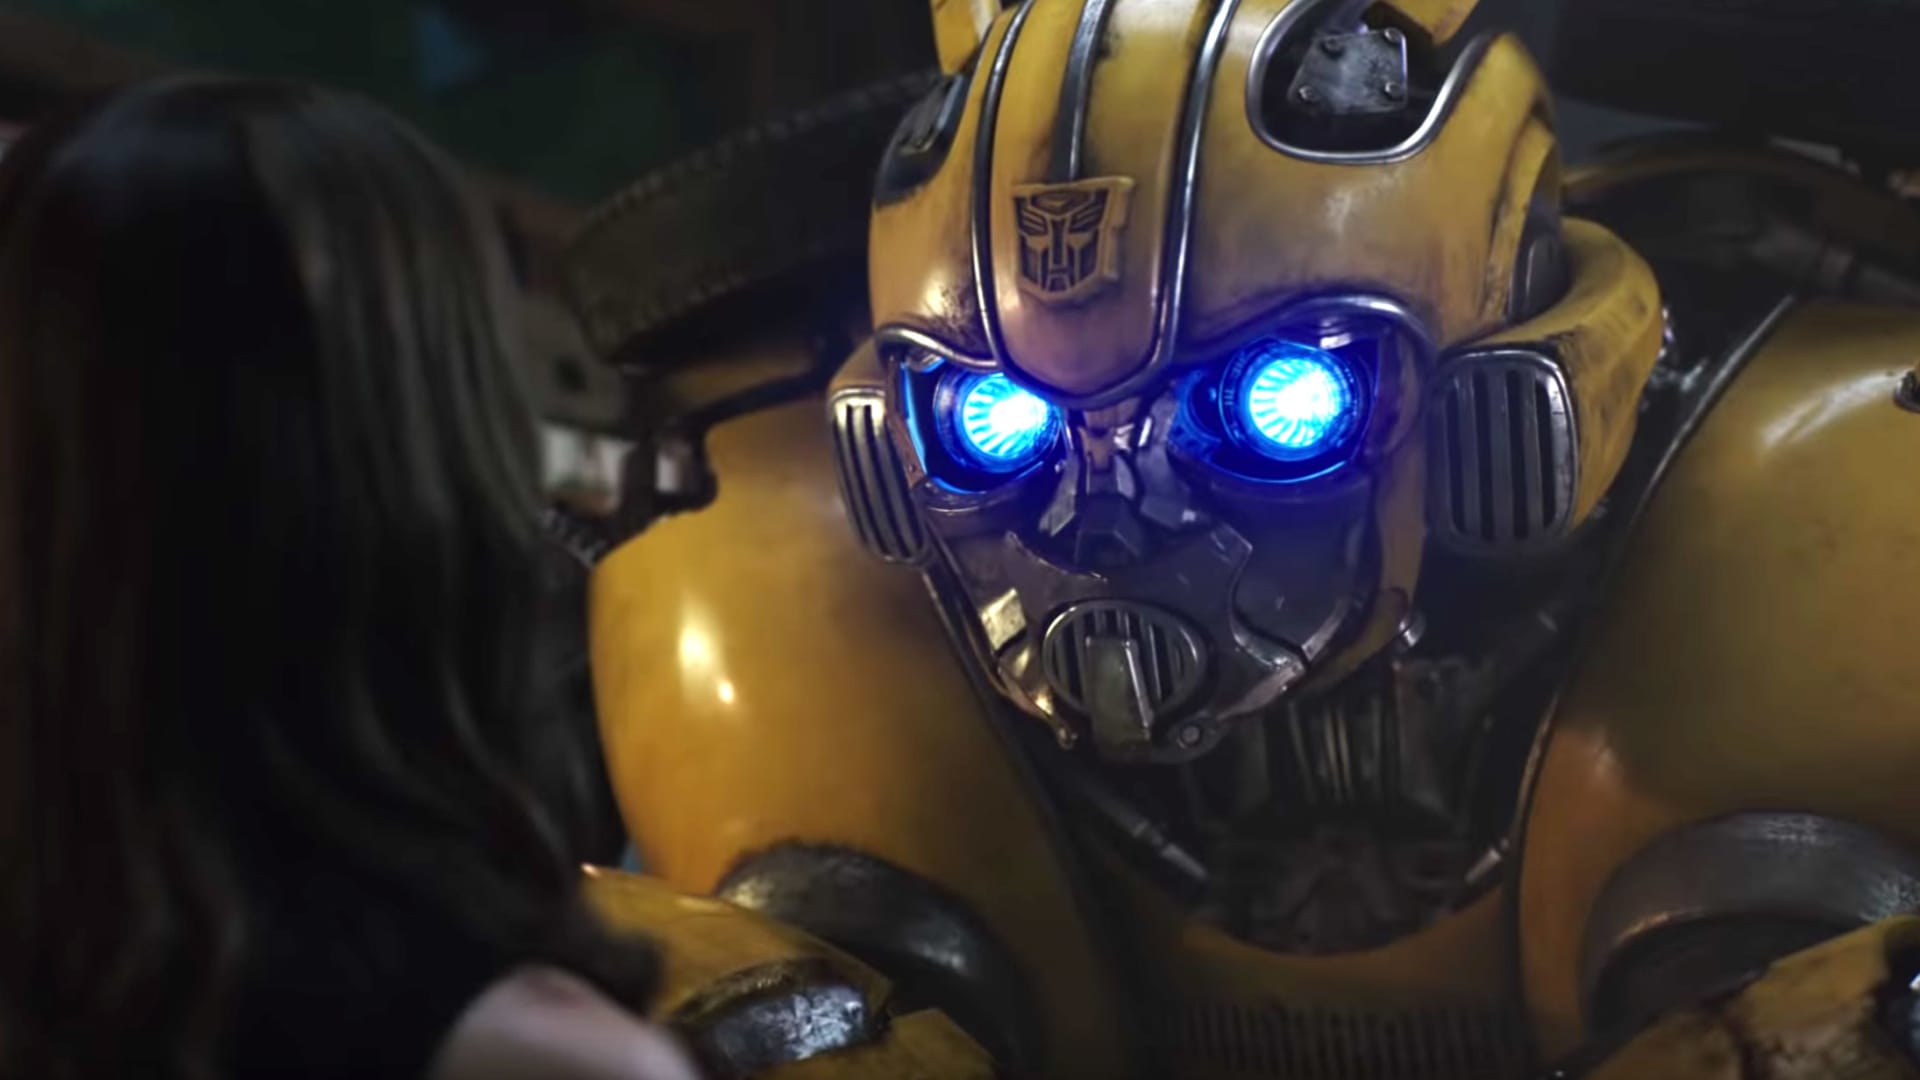 Hasbro CEO hints Bumblebee could get Transformers spin-off film